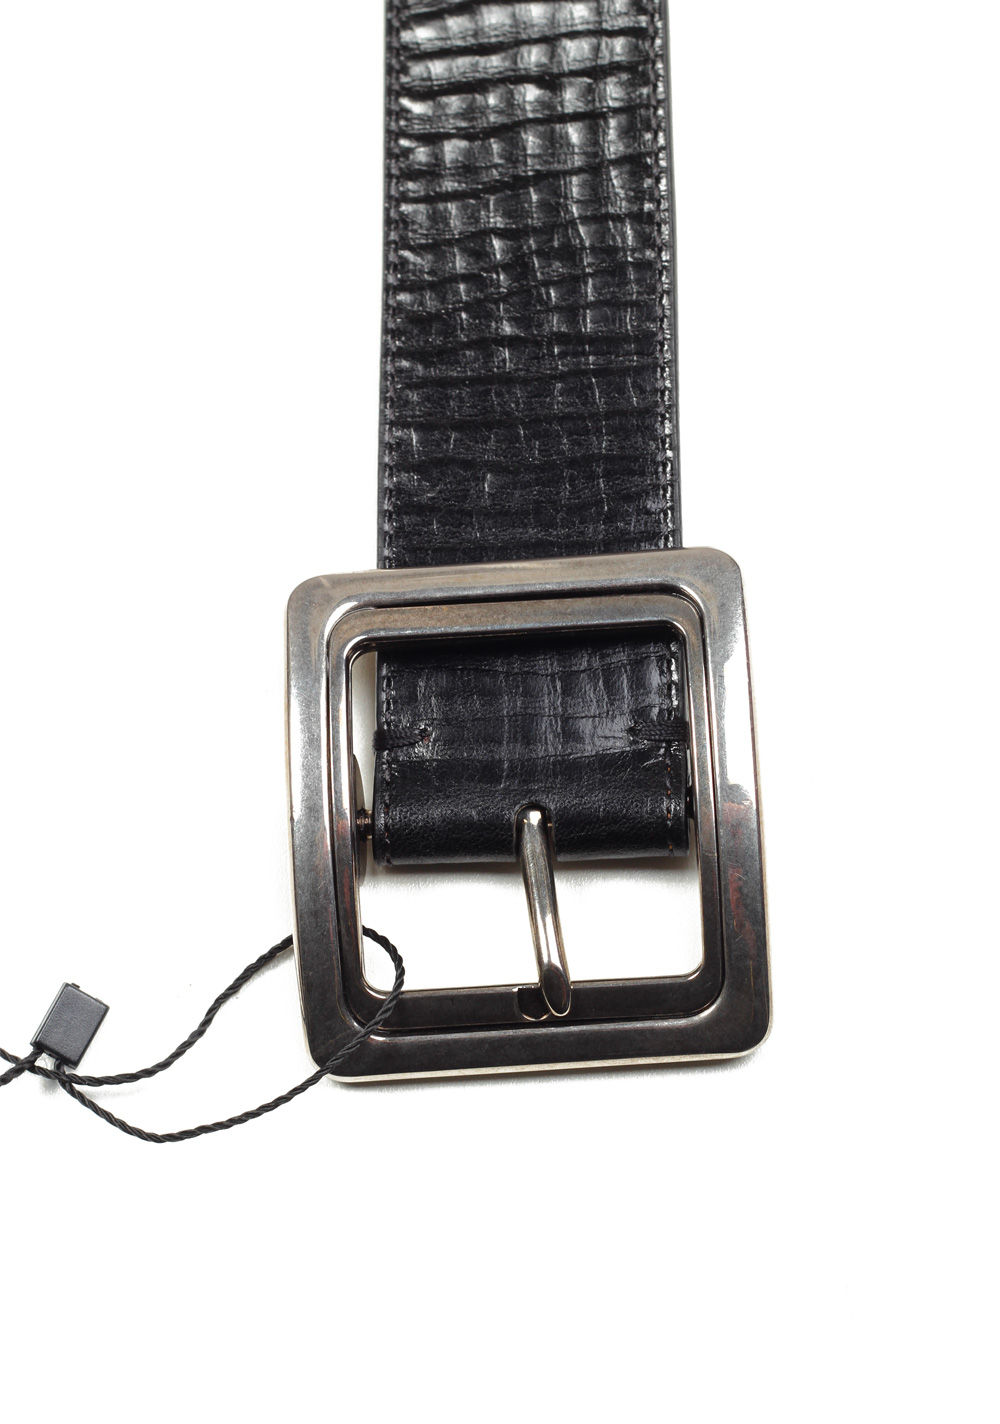 TOM FORD Black Casual Leather Silver Belt Size 115 / 42 U.S. | Costume Limité